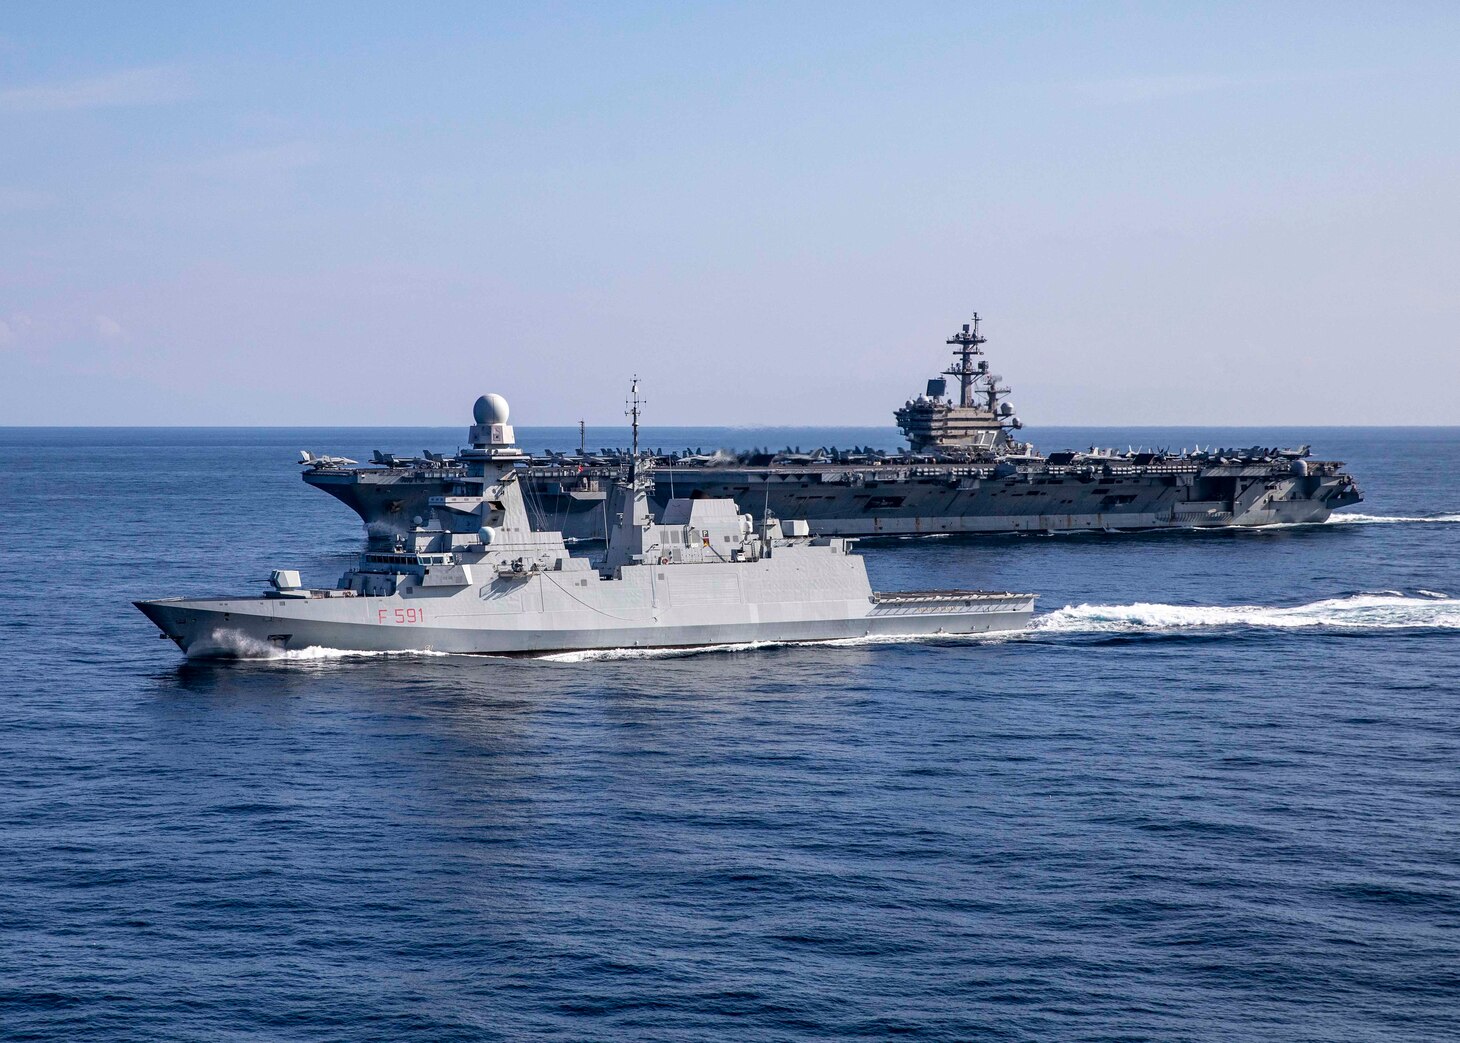 (March 5, 2023) The Carlo Bergamini-class frigate ITS Virginio Fasan (F 591) and the Nimitz-class aircraft carrier USS George H.W. Bush (CVN 77) transit the Mediterranean Sea, March 5, 2023. The George H.W. Bush CSG is on a scheduled deployment in the U.S. Naval Forces Europe area of operations, employed by U.S. Sixth Fleet to defend U.S., allied and partner interests.